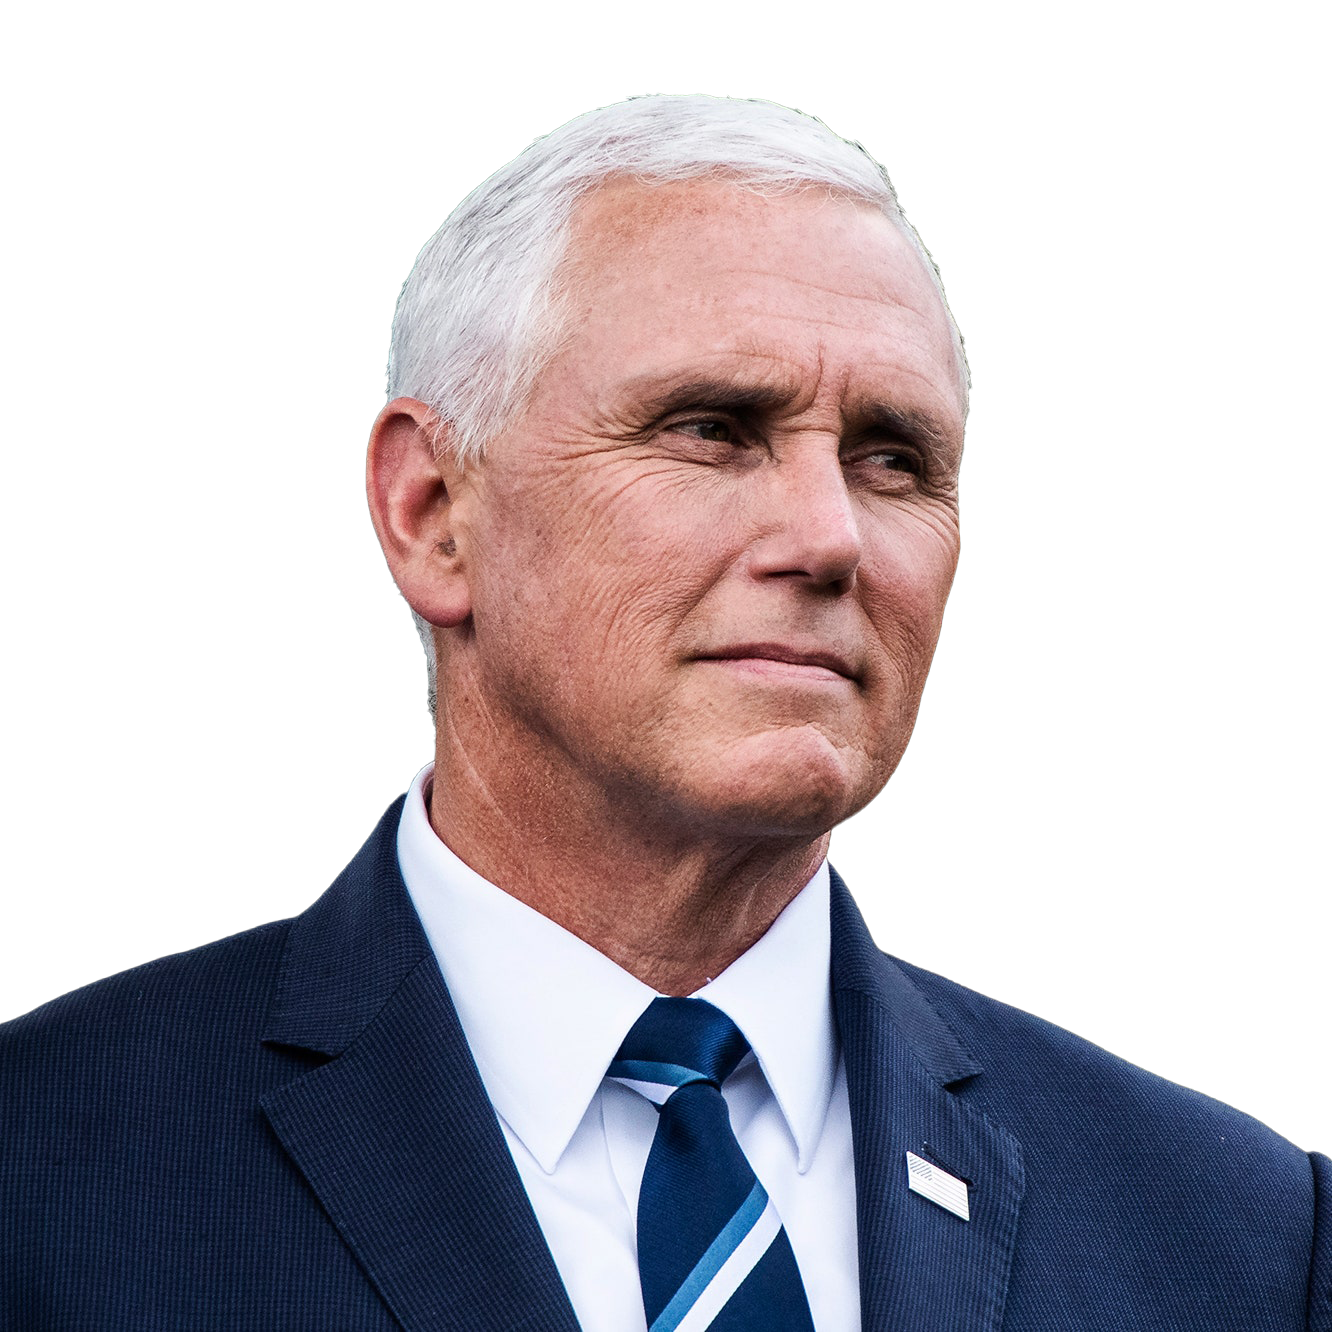 Mike Pence Transparent Image